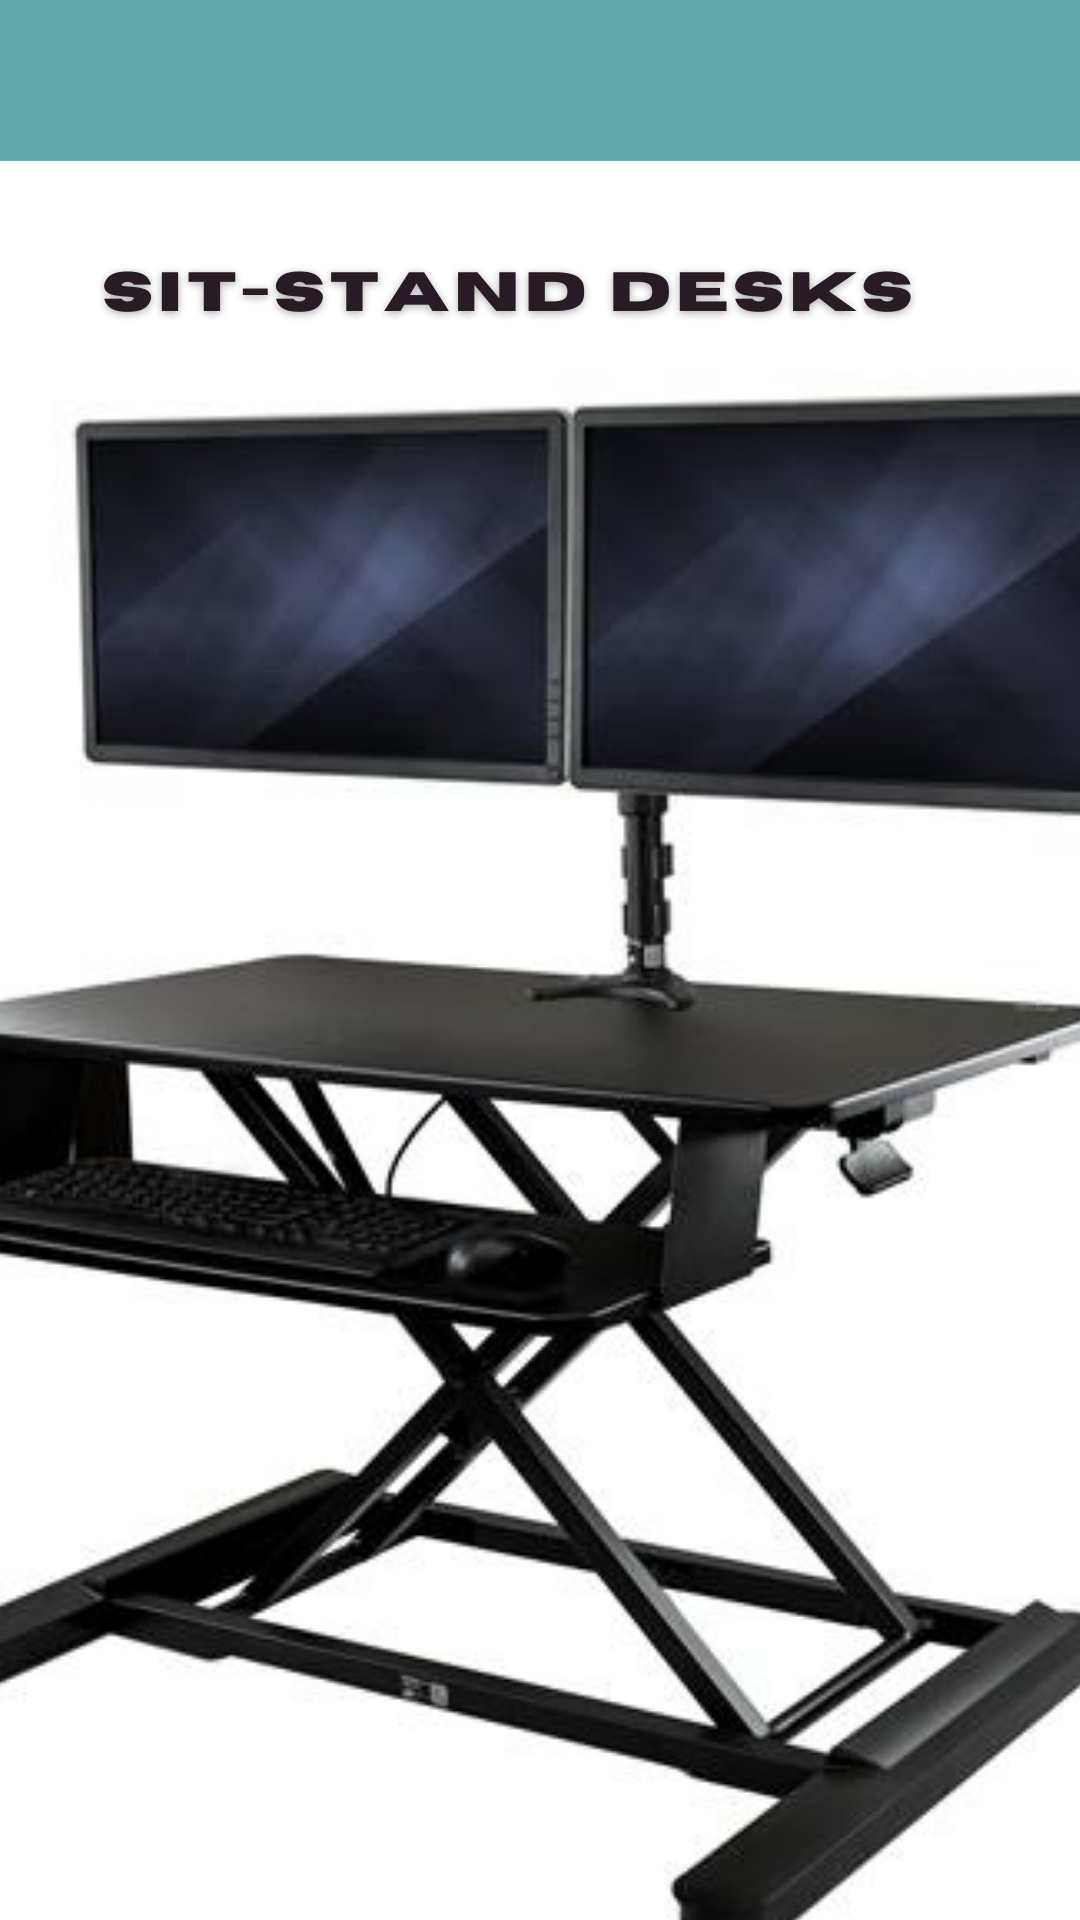 What should I look for when shopping for sit-stand desks?